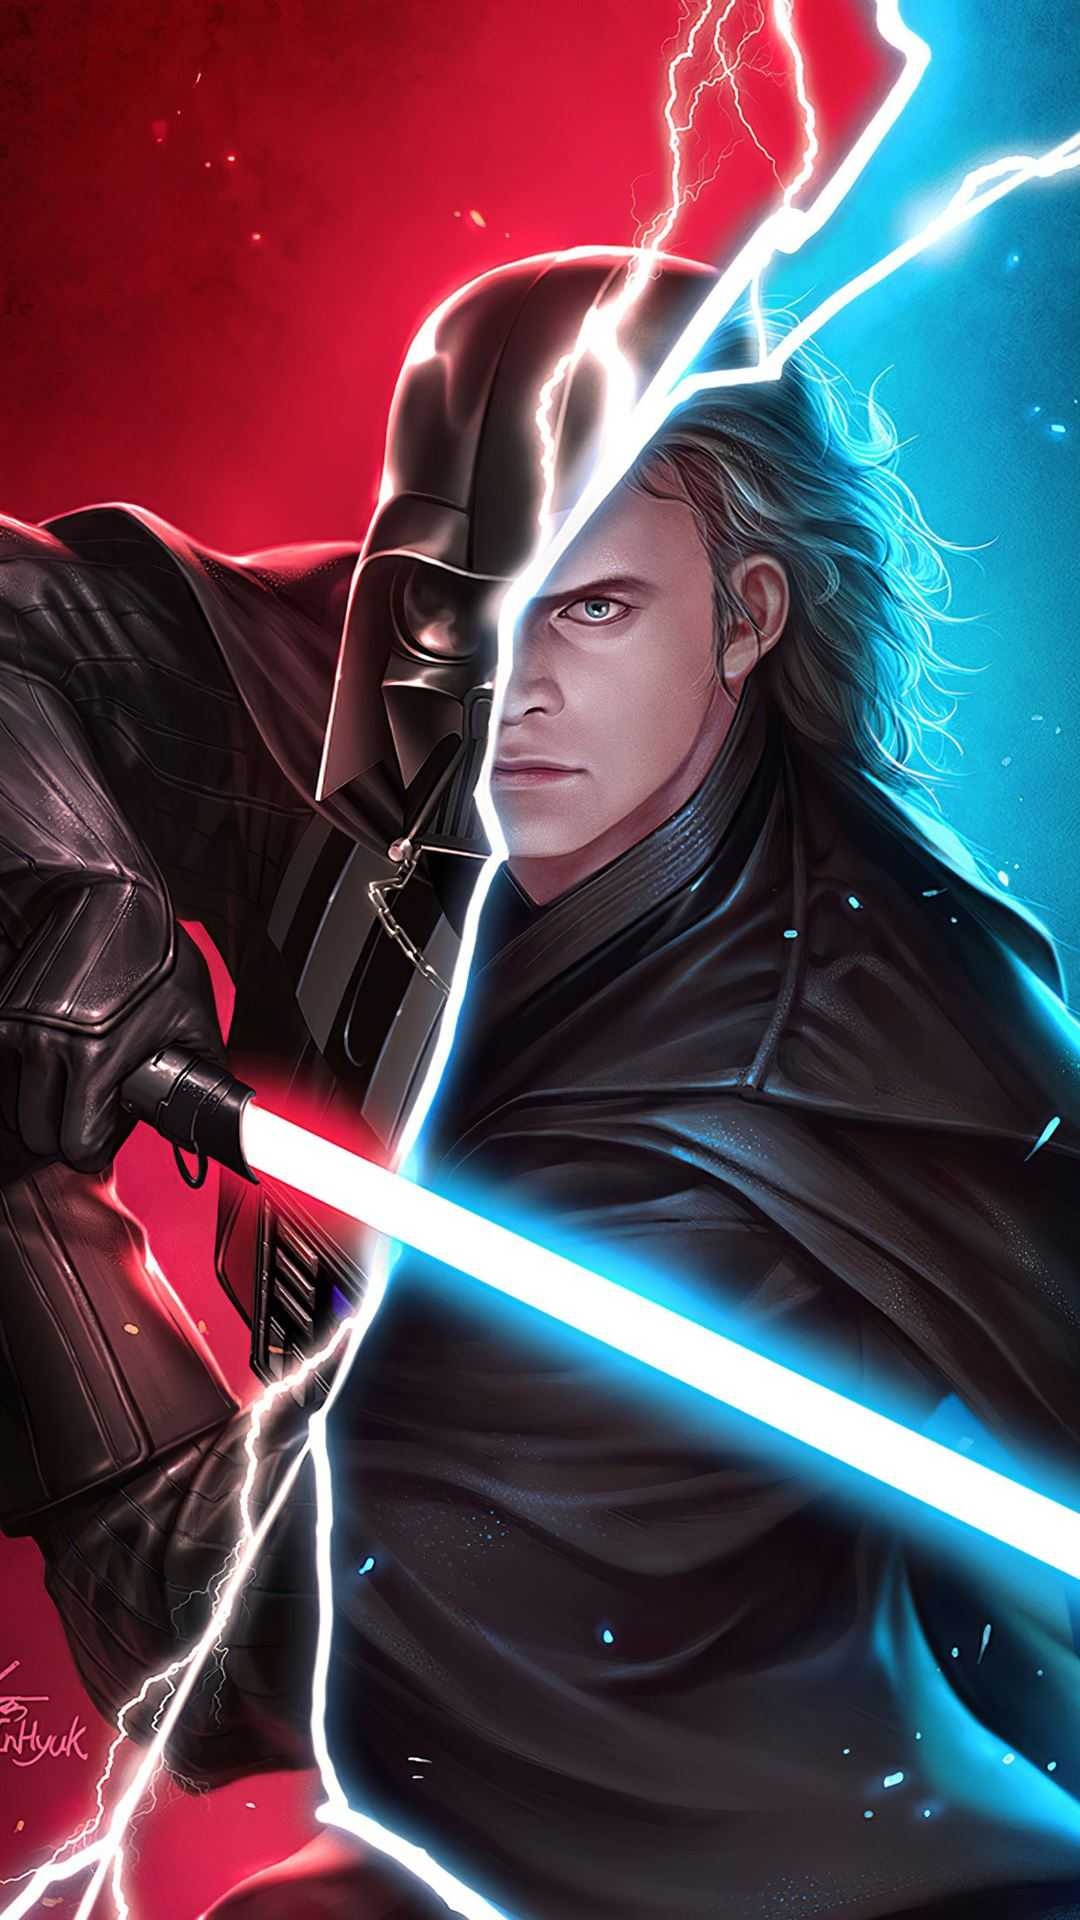 Darth Vader: Betrayed and turned against the Jedi Order, Anakin Skywalker. 1080x1920 Full HD Background.